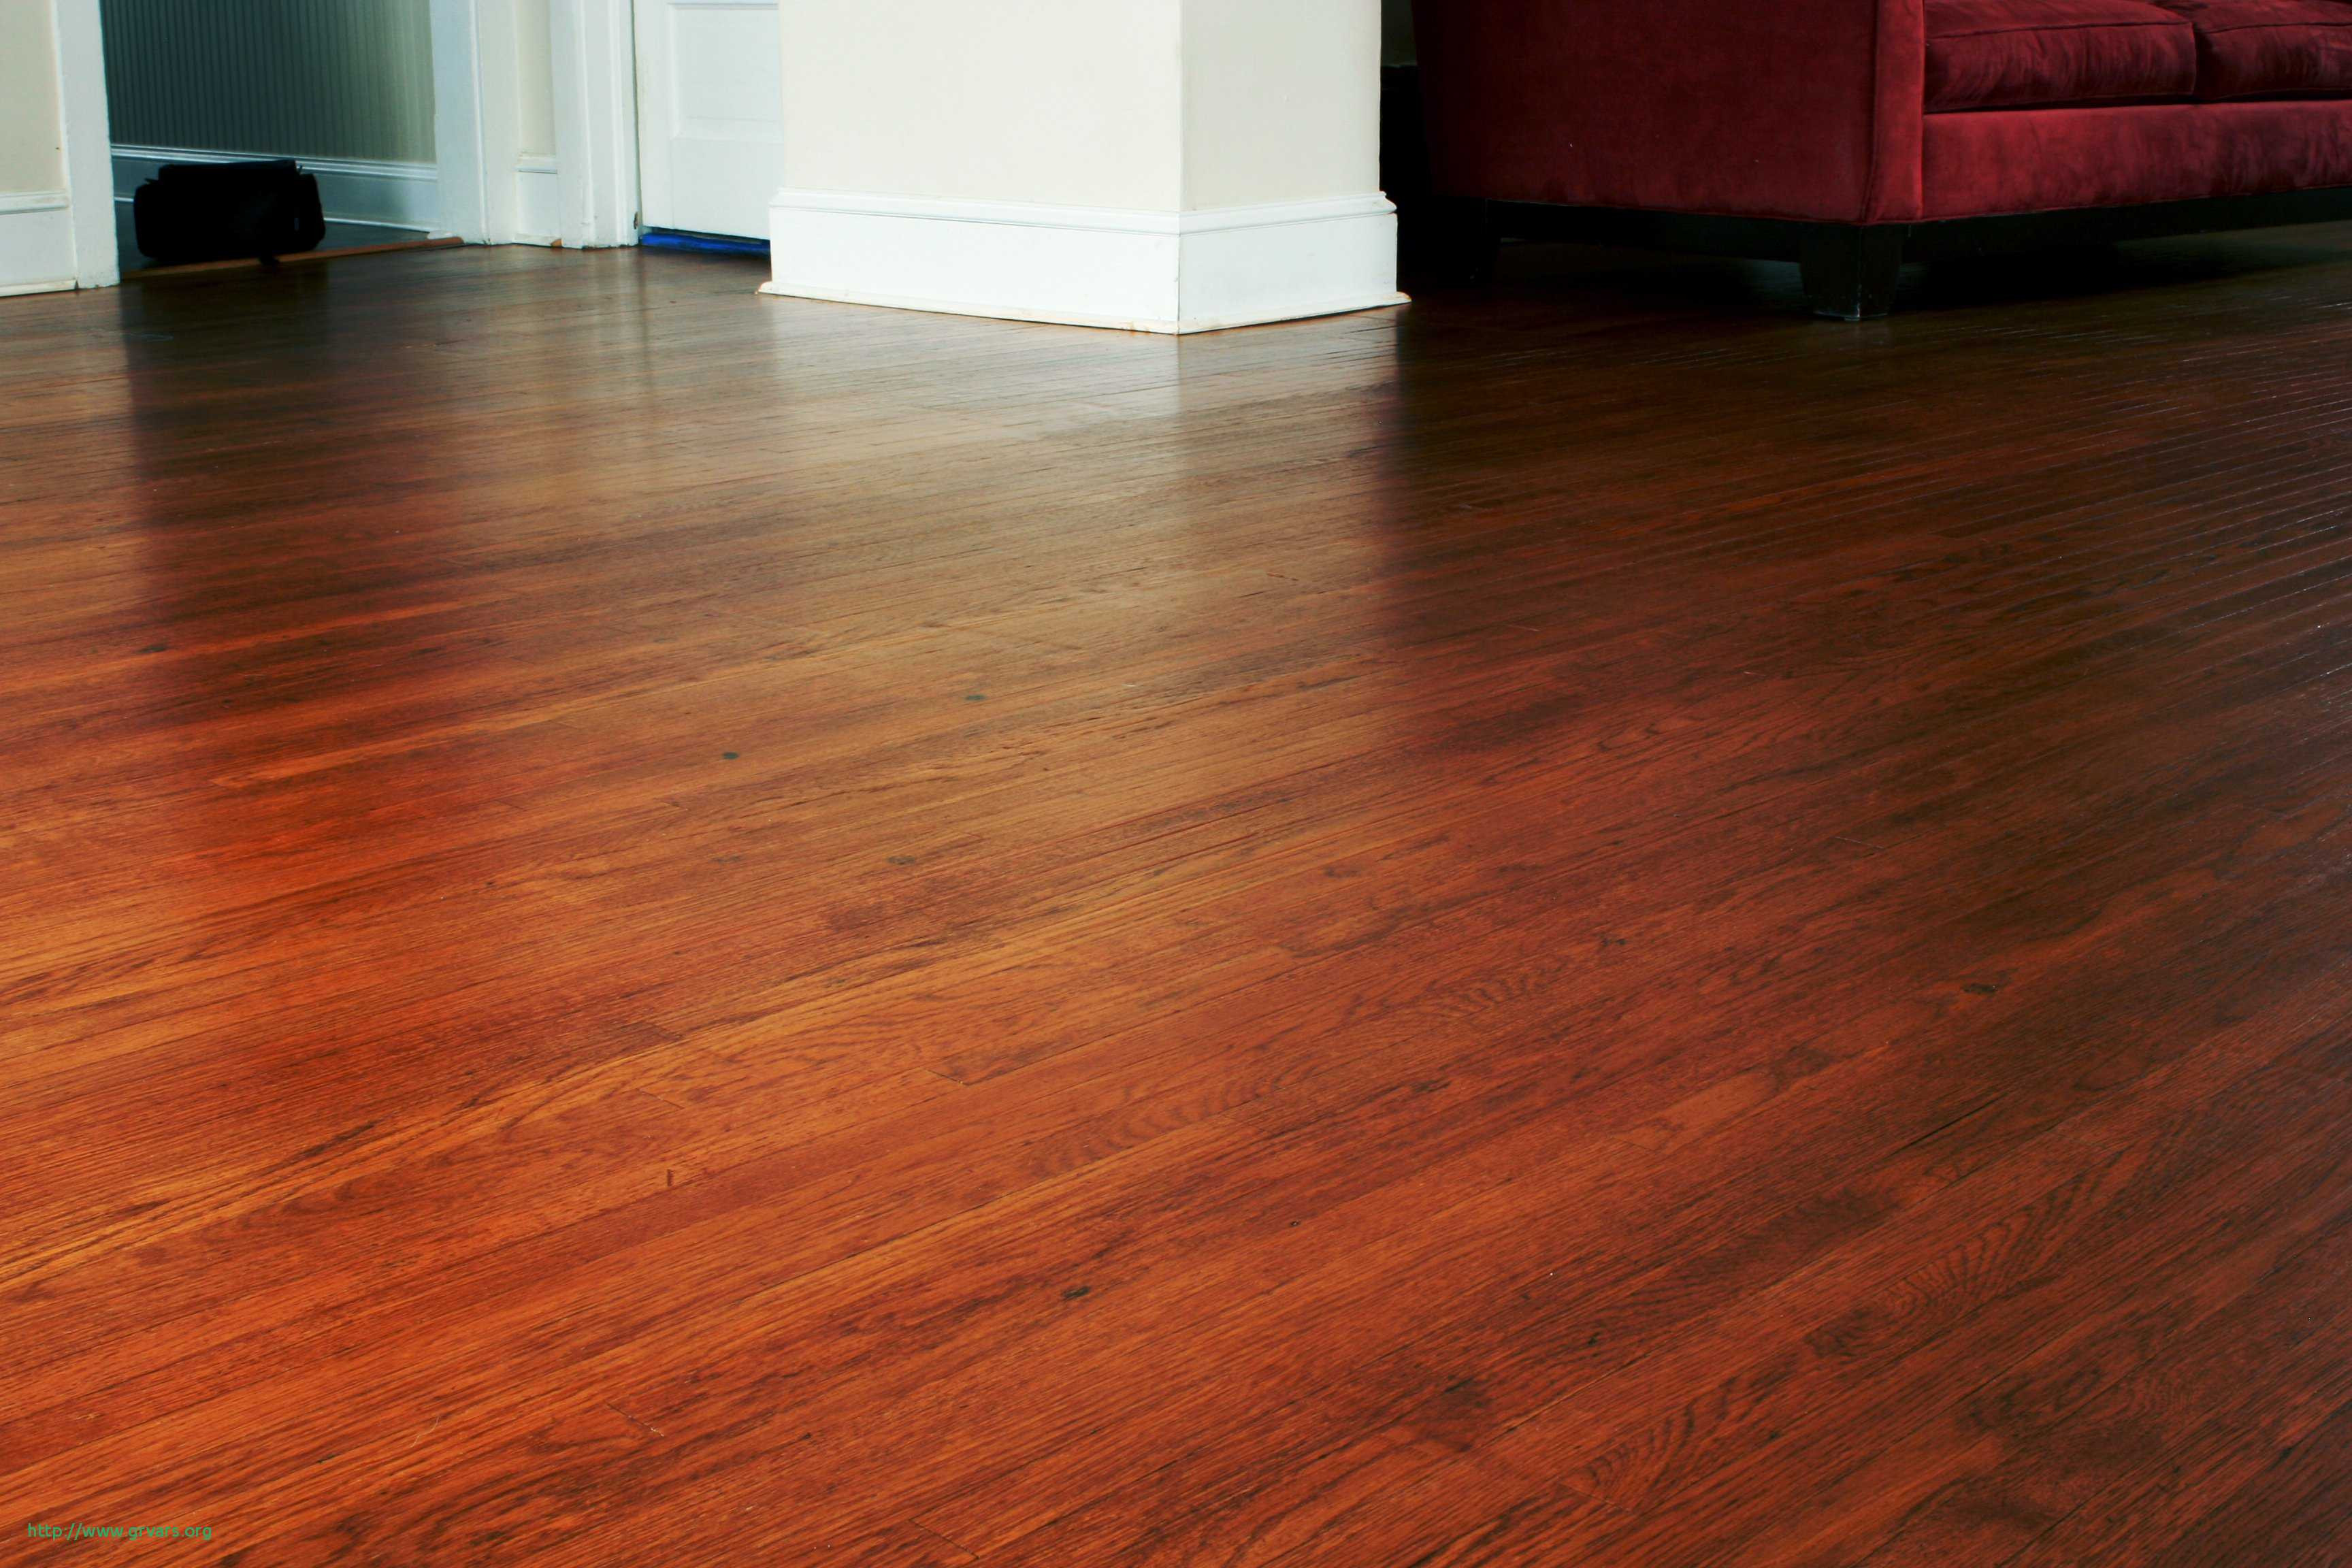 26 Fantastic How Much Does Home Depot Charge to Install Hardwood Floors 2022 free download how much does home depot charge to install hardwood floors of 17 frais cost to replace flooring in home ideas blog with regard to cost to replace flooring in home charmant how to diagnose an